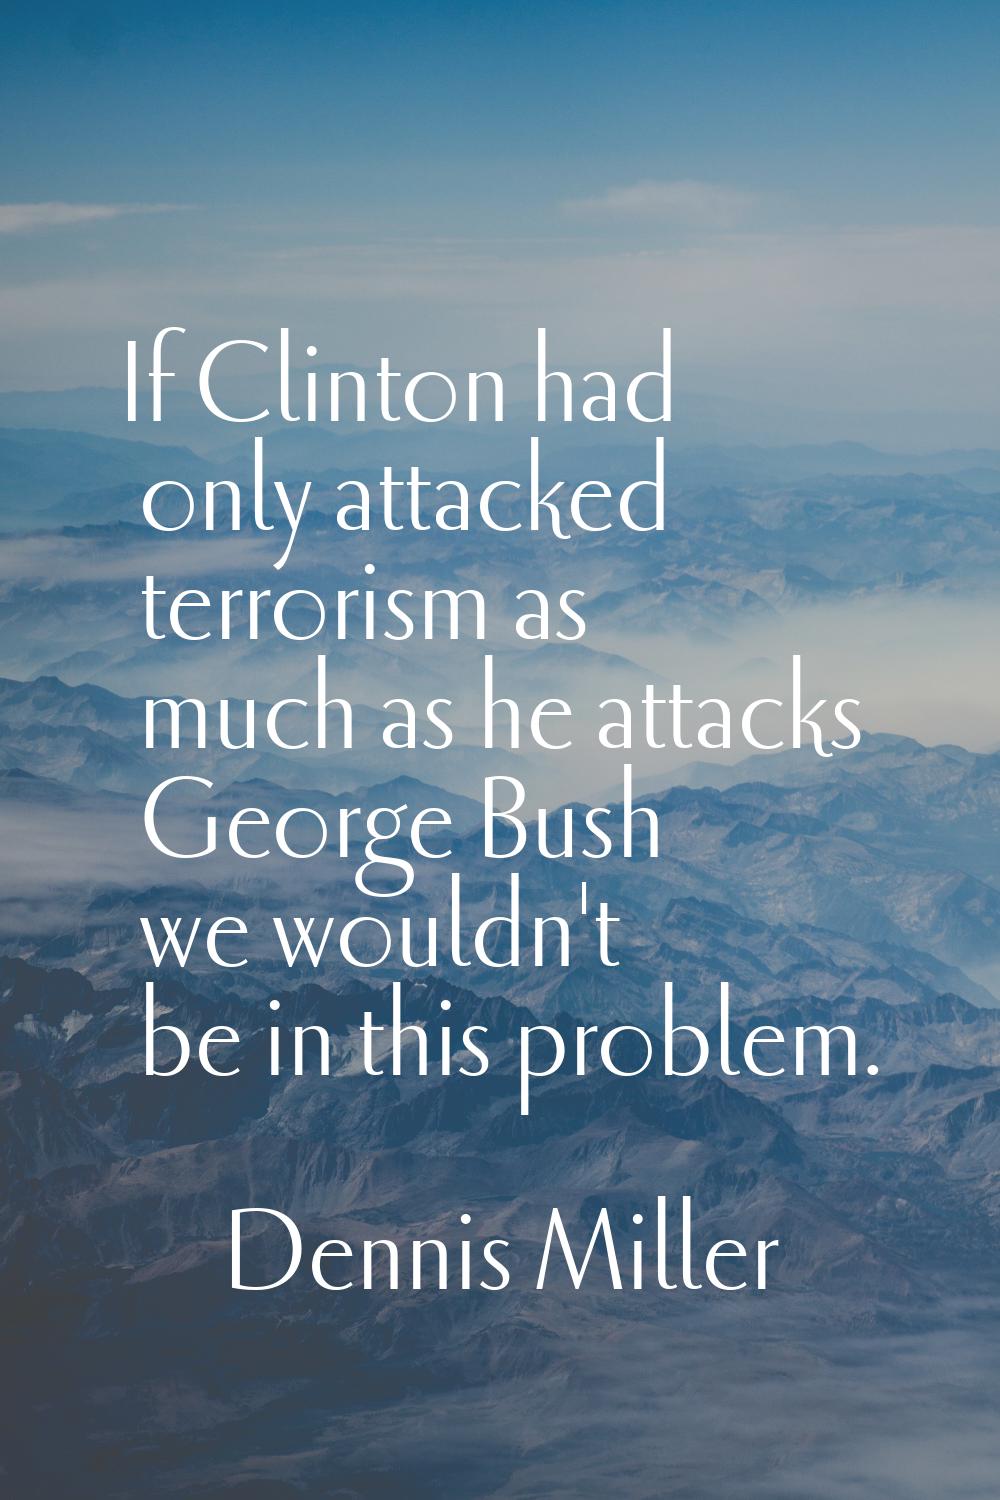 If Clinton had only attacked terrorism as much as he attacks George Bush we wouldn't be in this pro